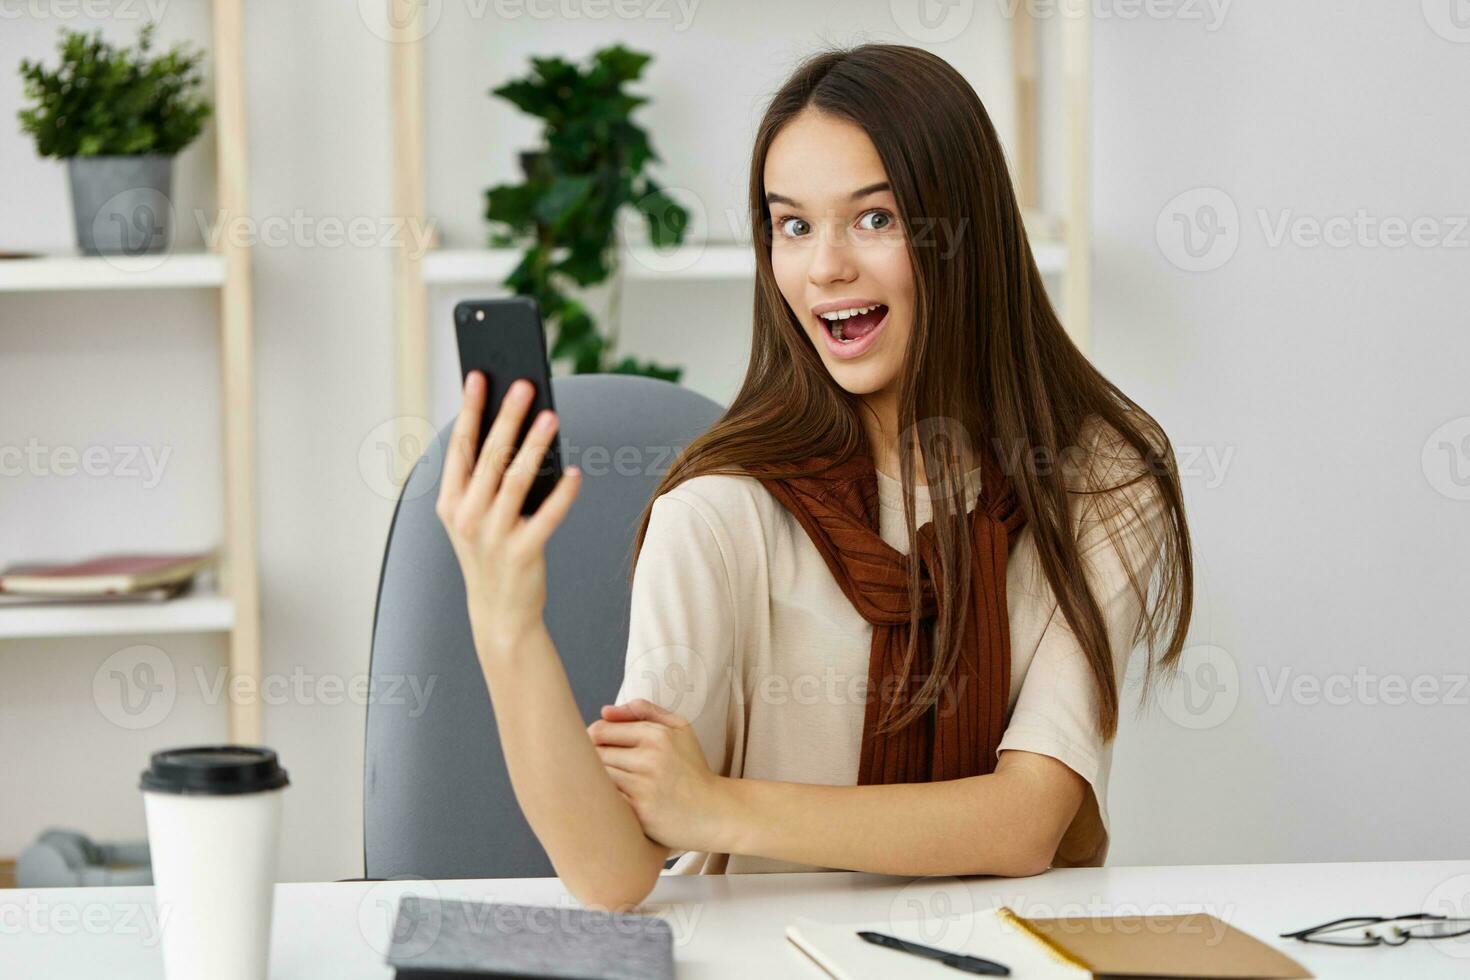 learning smile education student blogger phone girl laptop young selfie photo